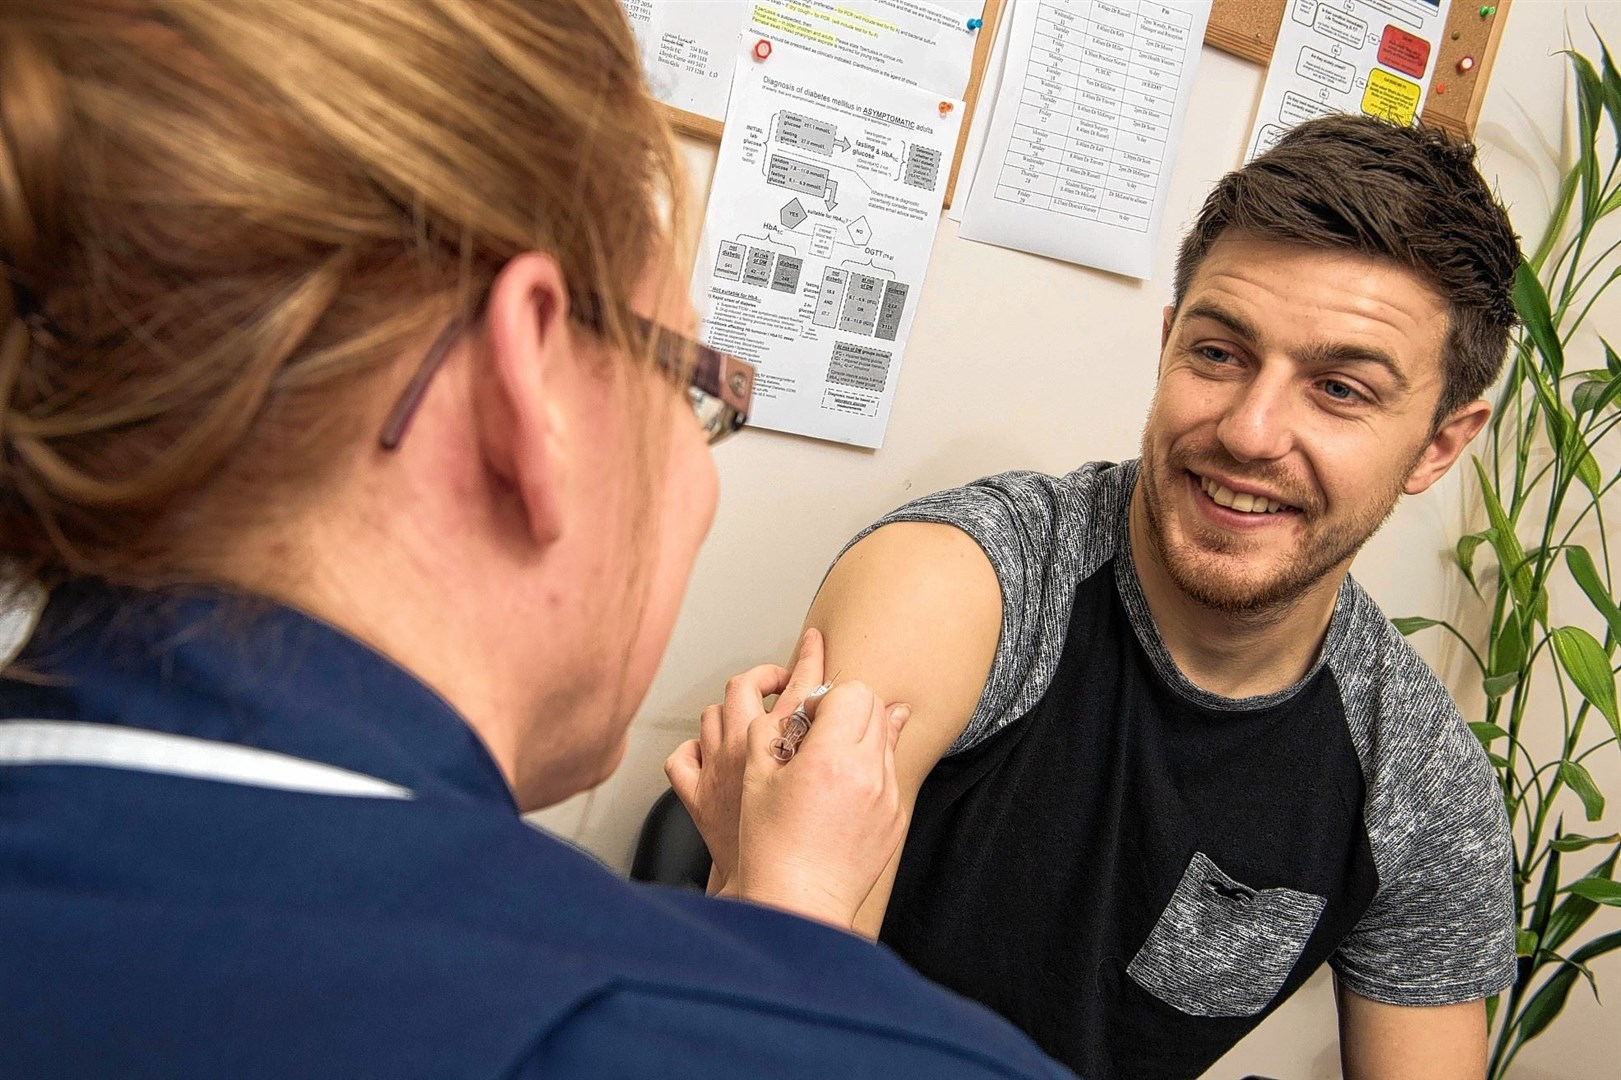 People with health conditions have been urged to get their flu vaccine as early as possible this winter to help protect themselves..